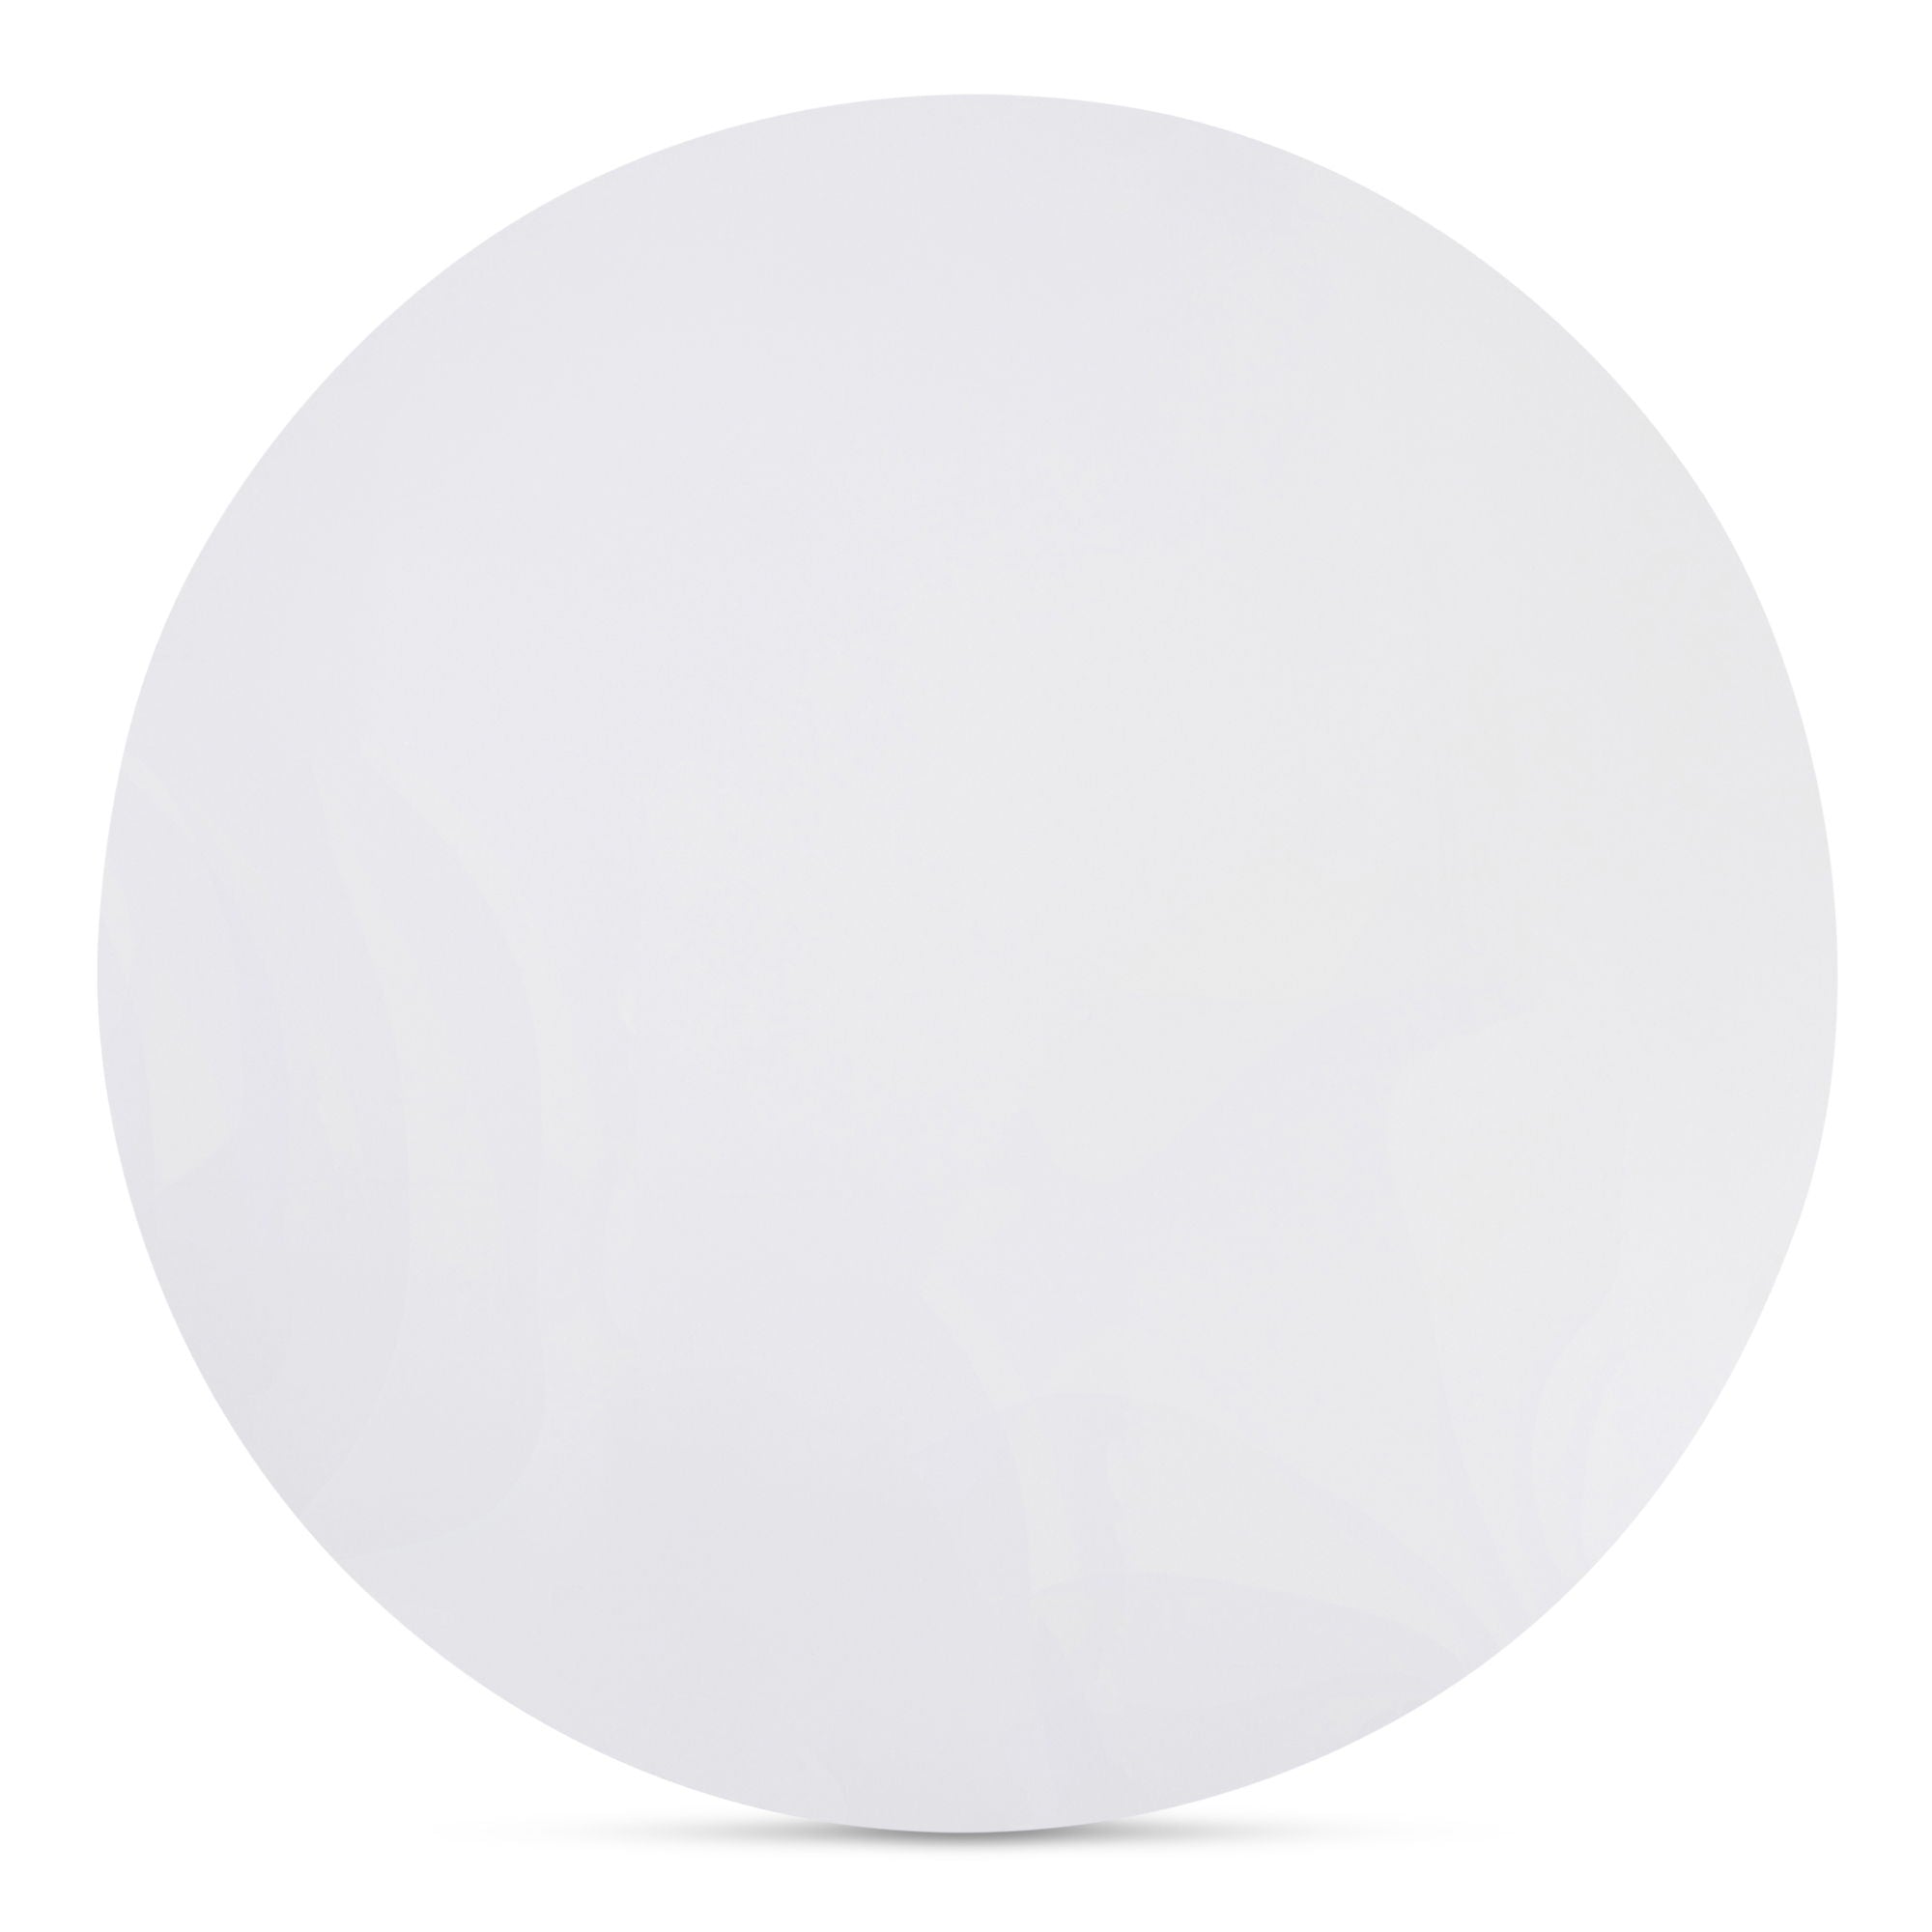 Otago - Round Dining Table - High Gloss White